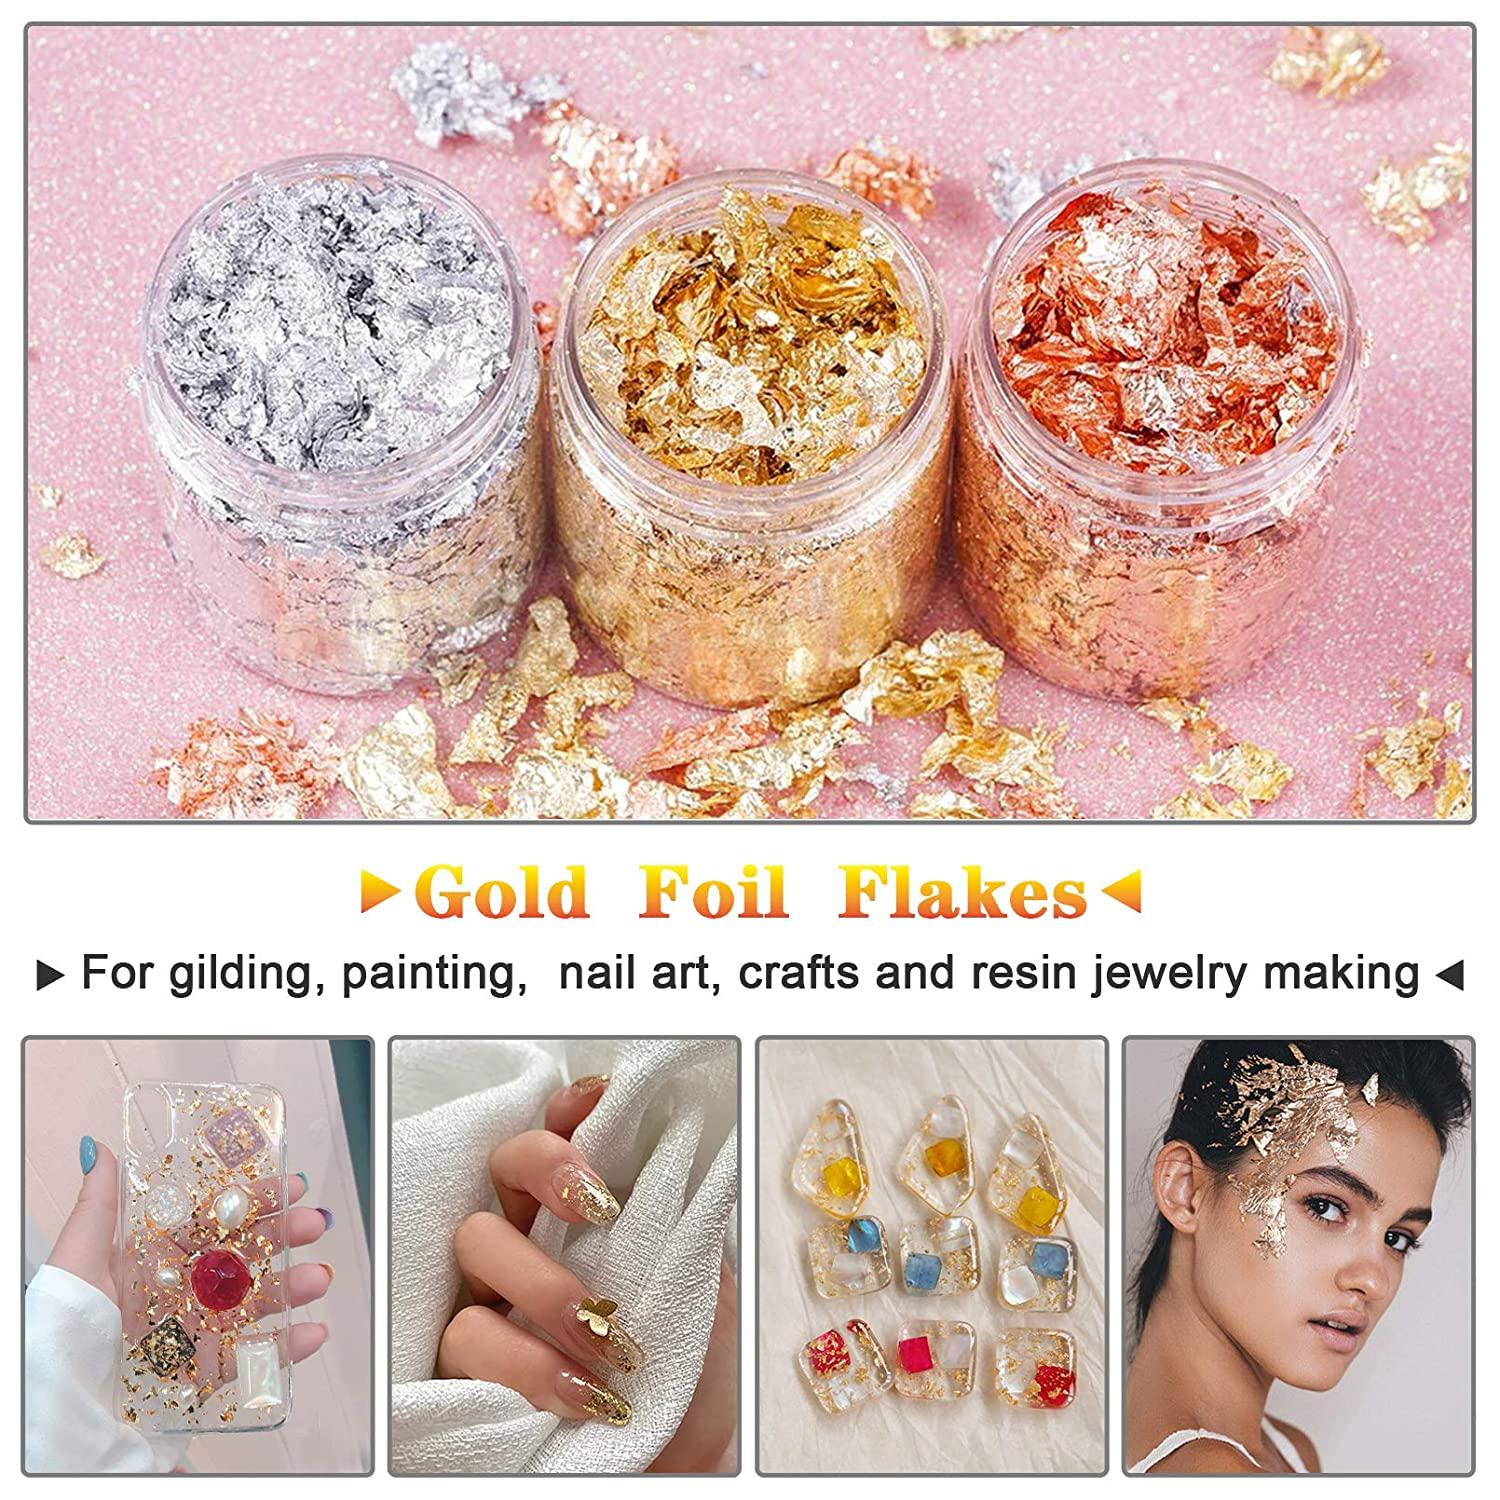 3 Bottles Gilding Flakes Set, Shiny Foil Flakes, Imitation Gold Metallic  Leaf for Art DIY Crafts-Resin Jewelry, Slime, Painting, Nail, Makeup